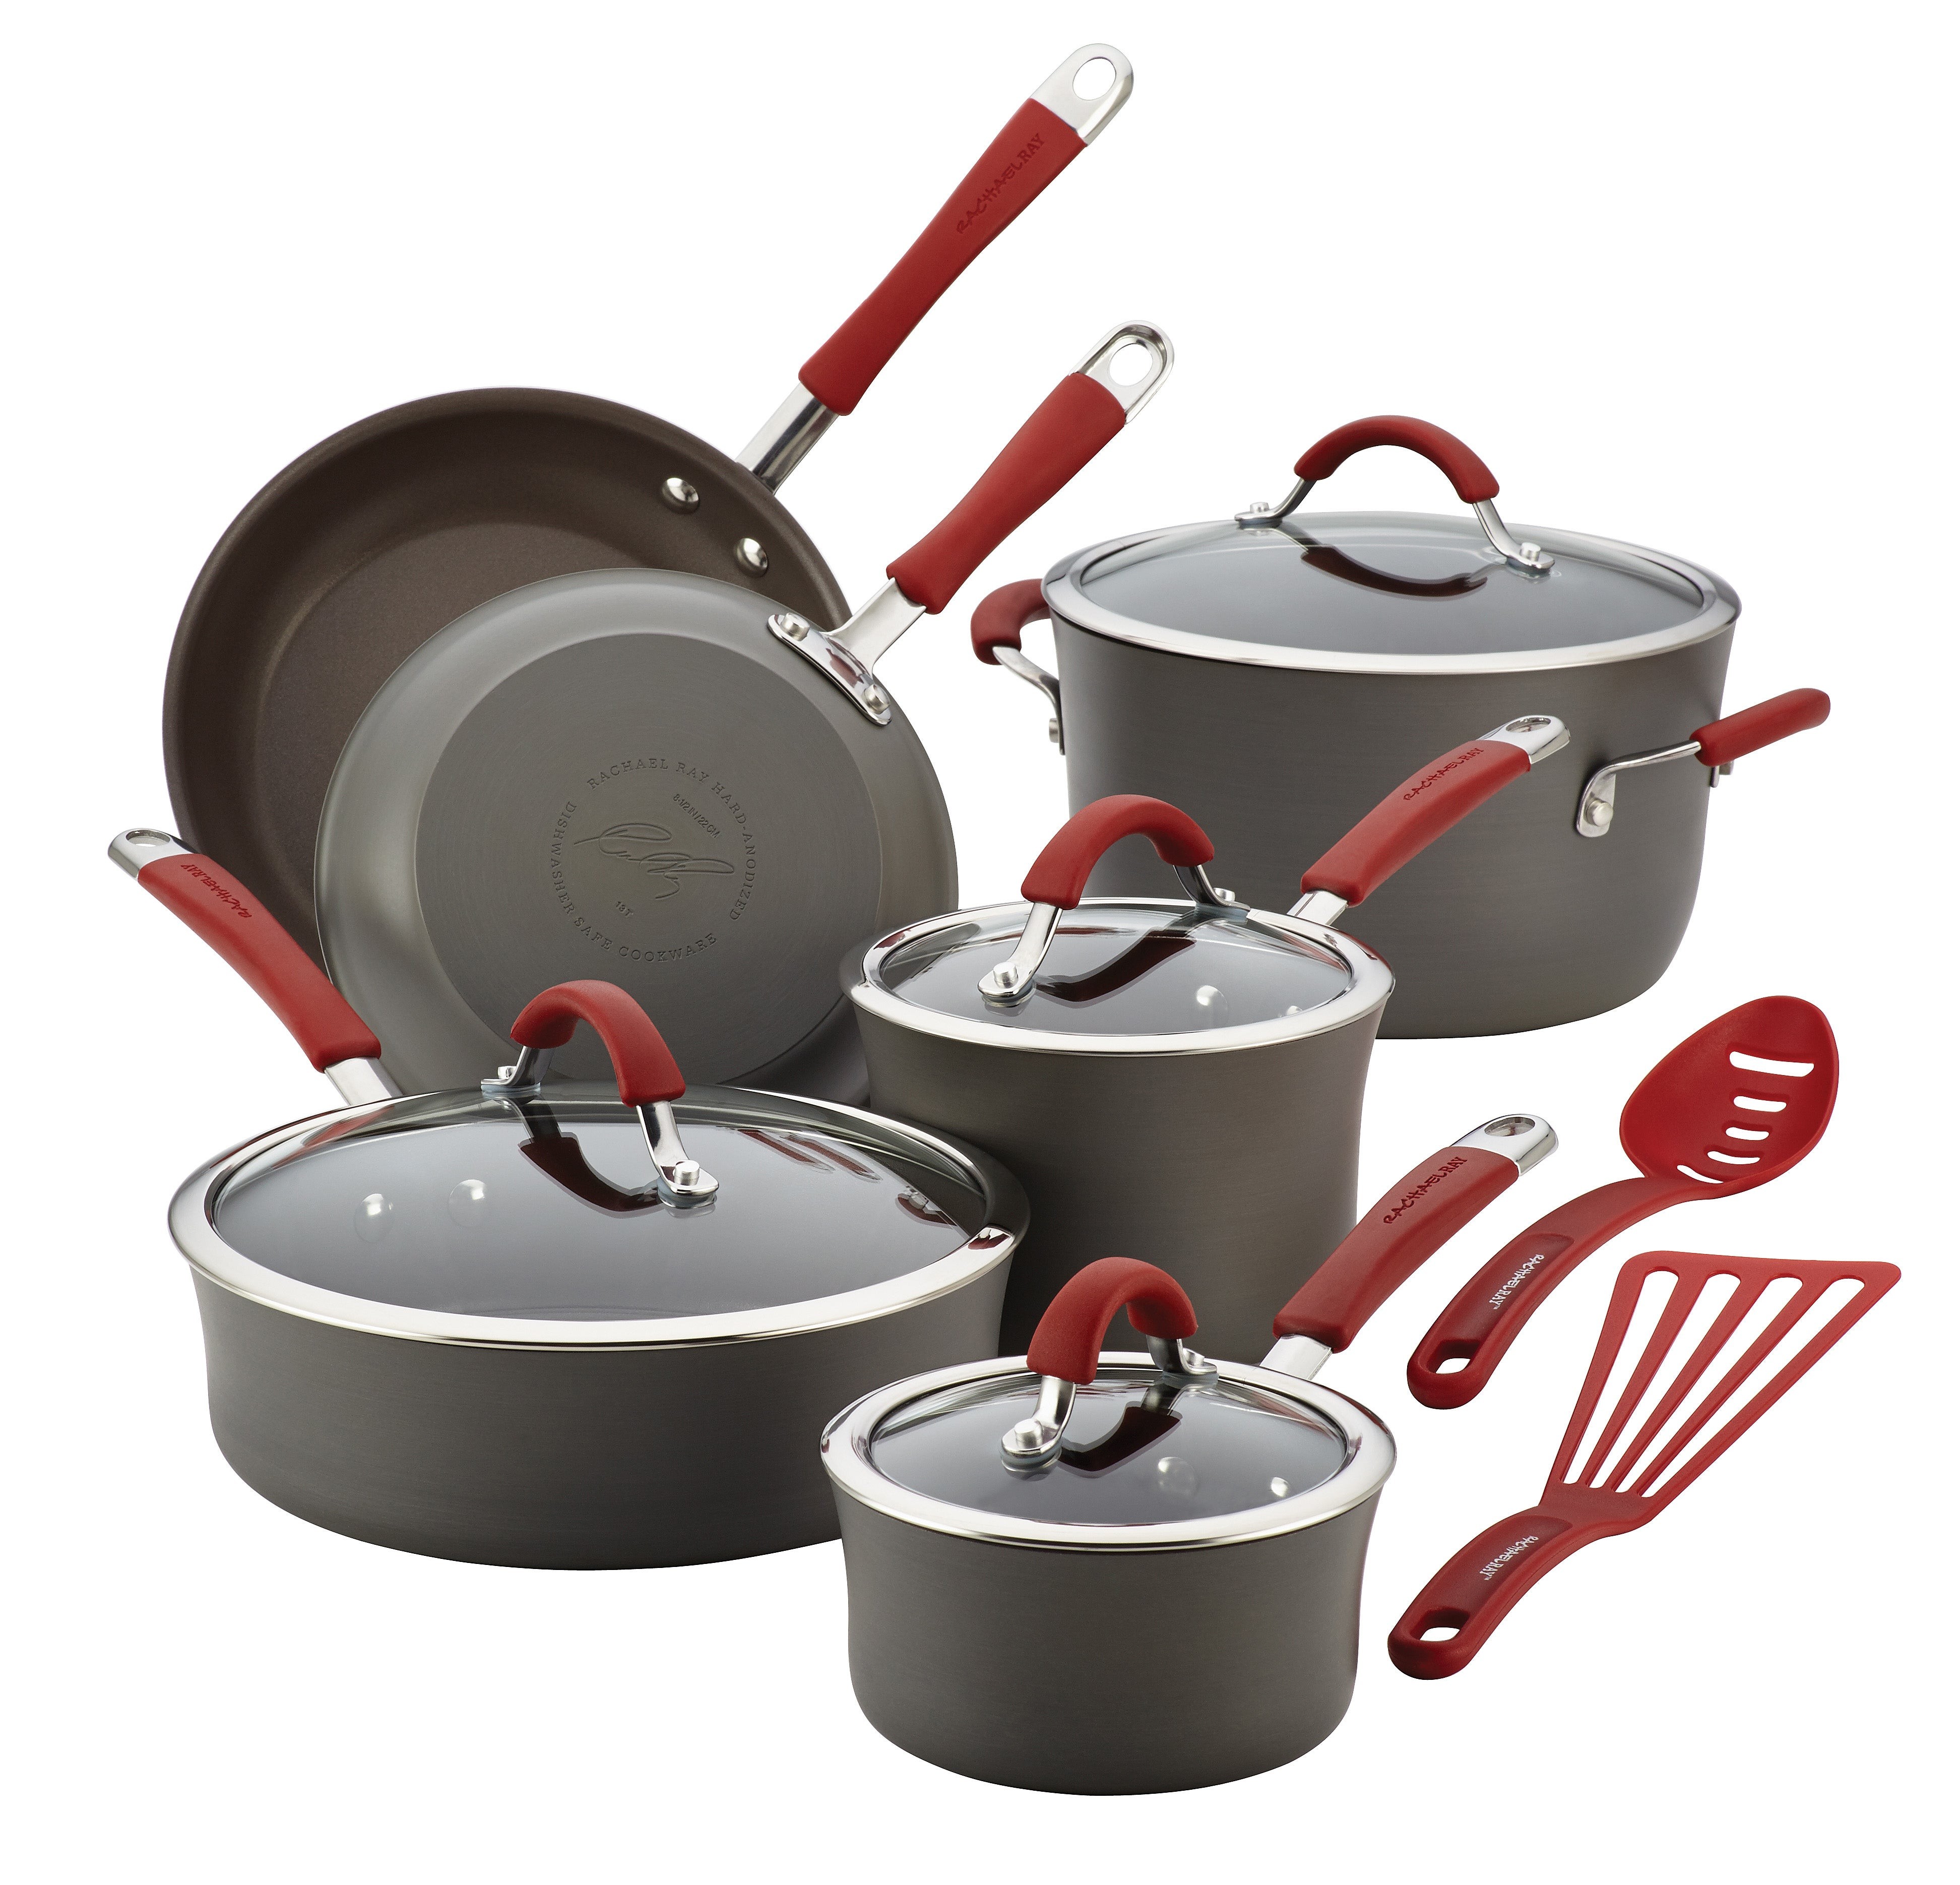 12pc Cucina Hard-Anodized Cookware Set Red Handles